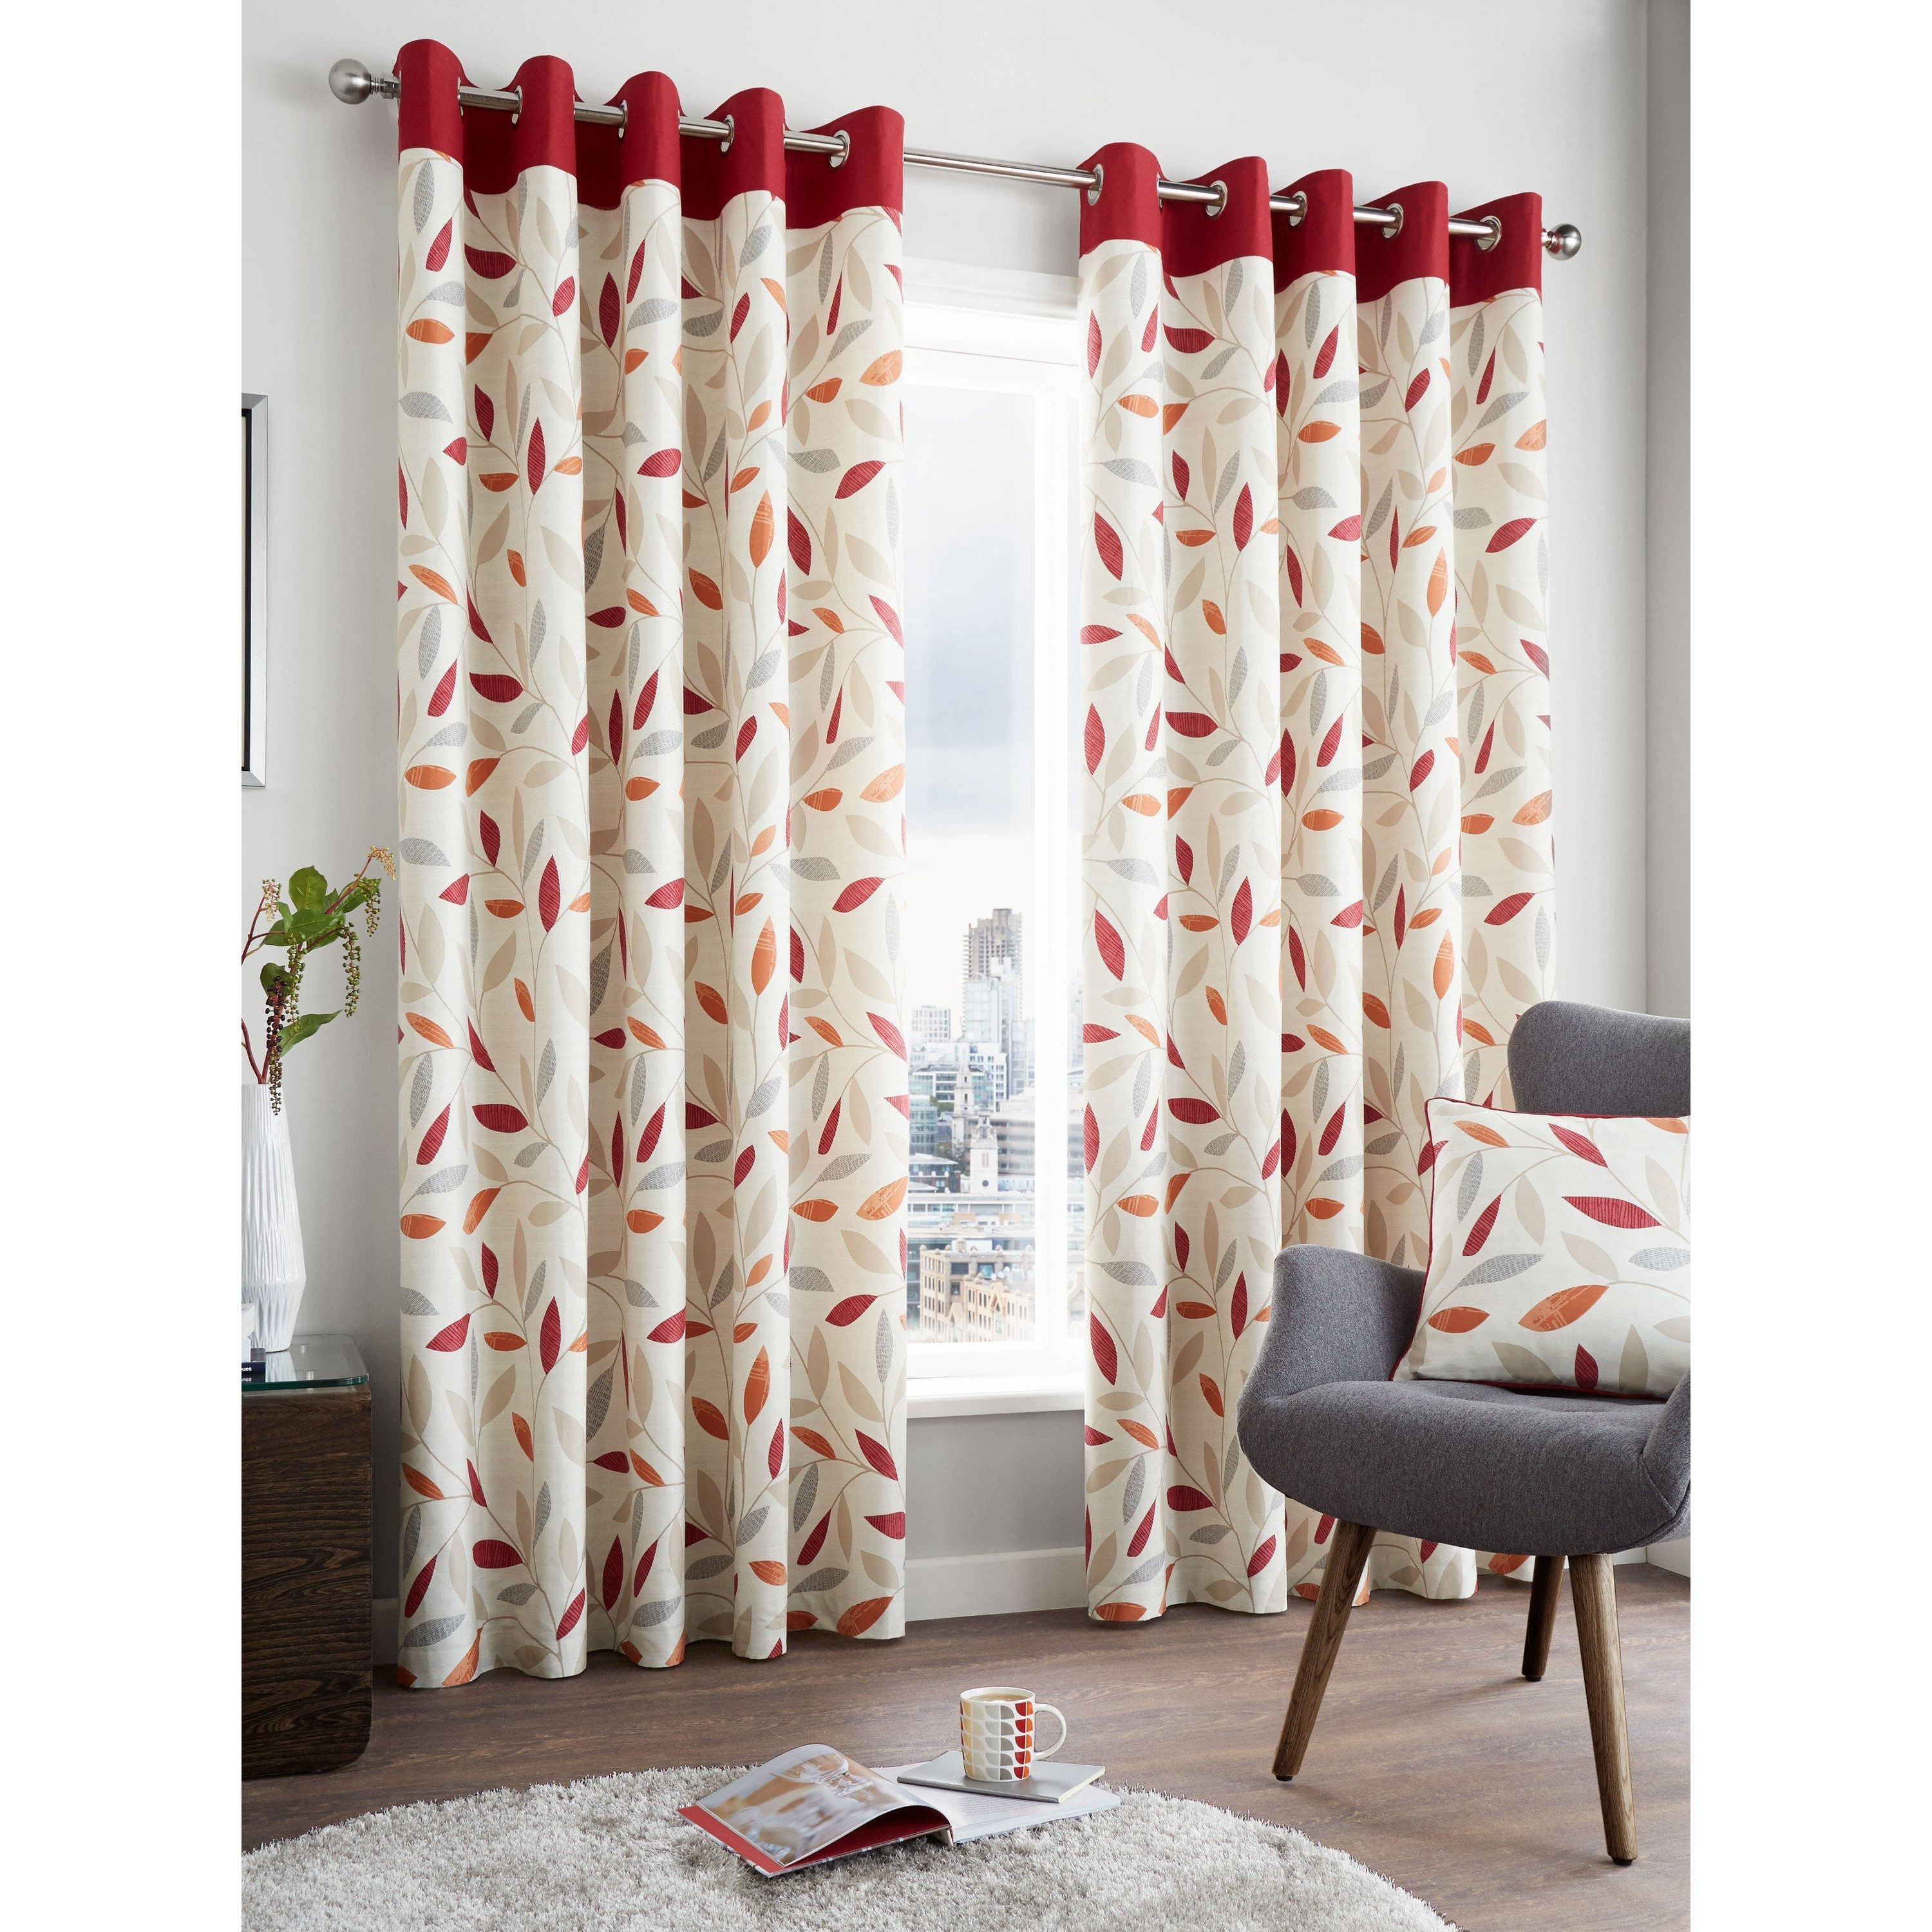 'Beechwood' Leaf Trail Pair of 100% Cotton Eyelet Curtains - image 1